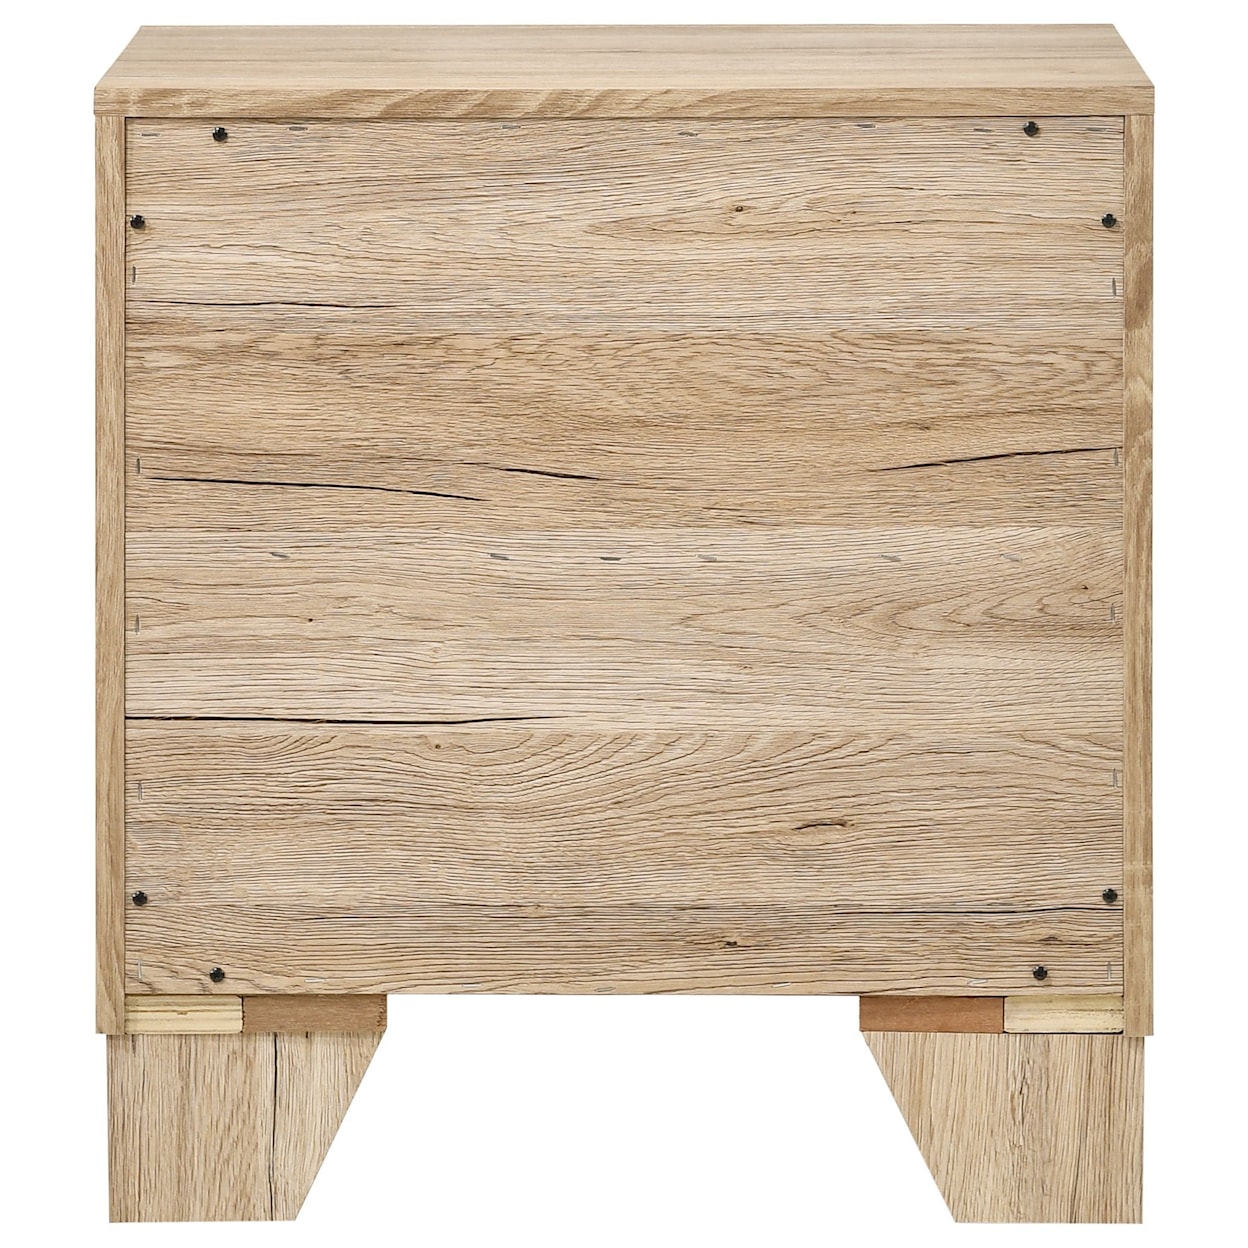 Acme Furniture Miquell Nightstand